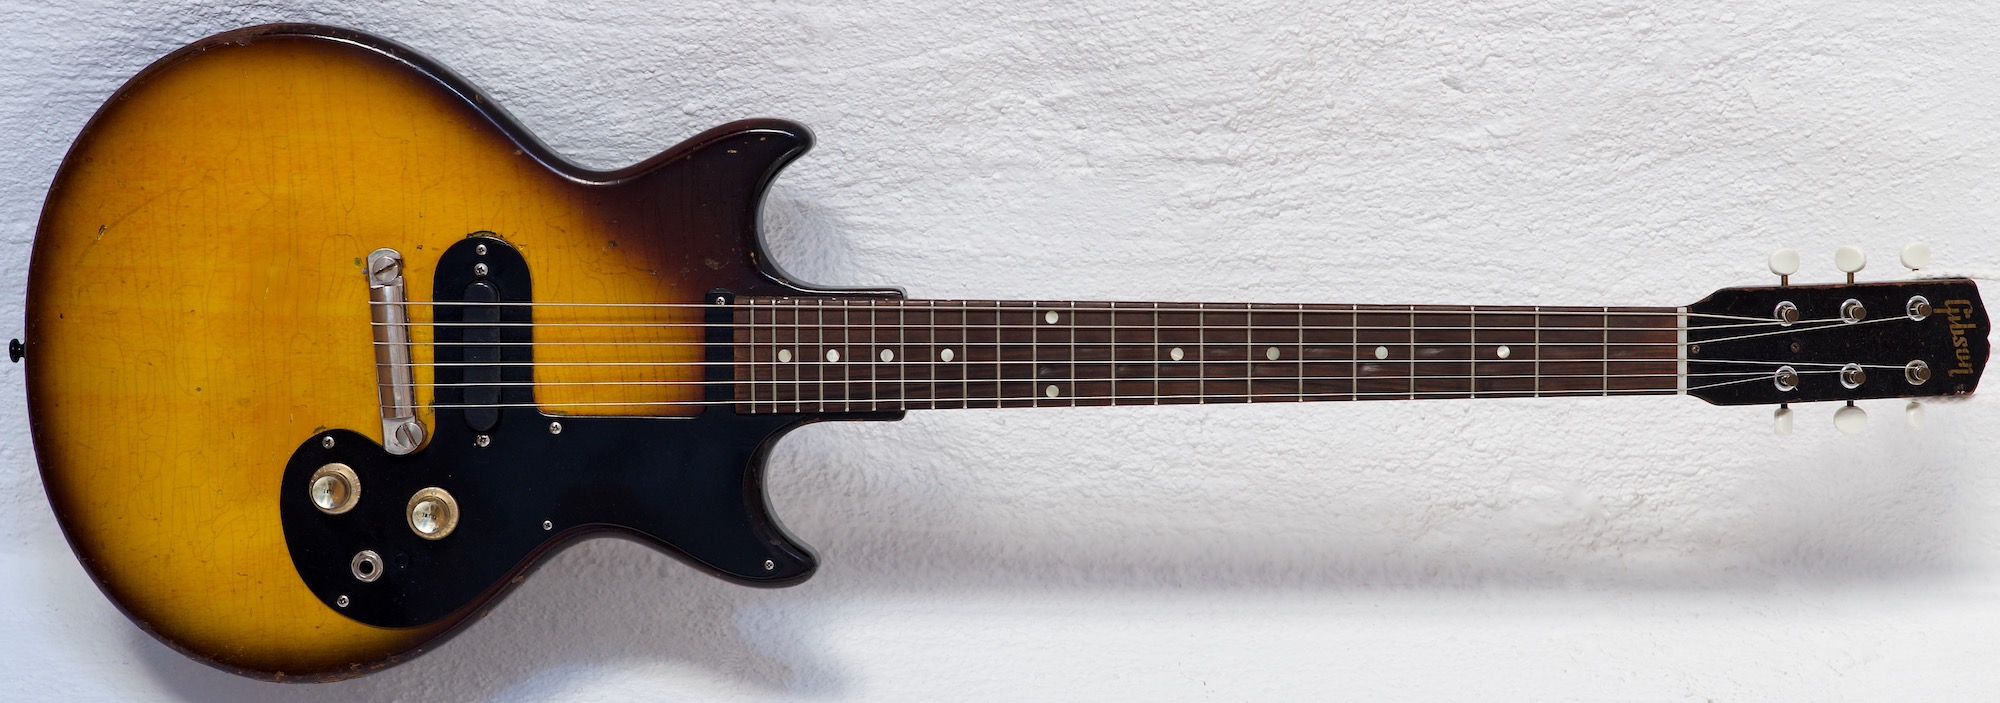 A Gibson Melody Maker from 1961